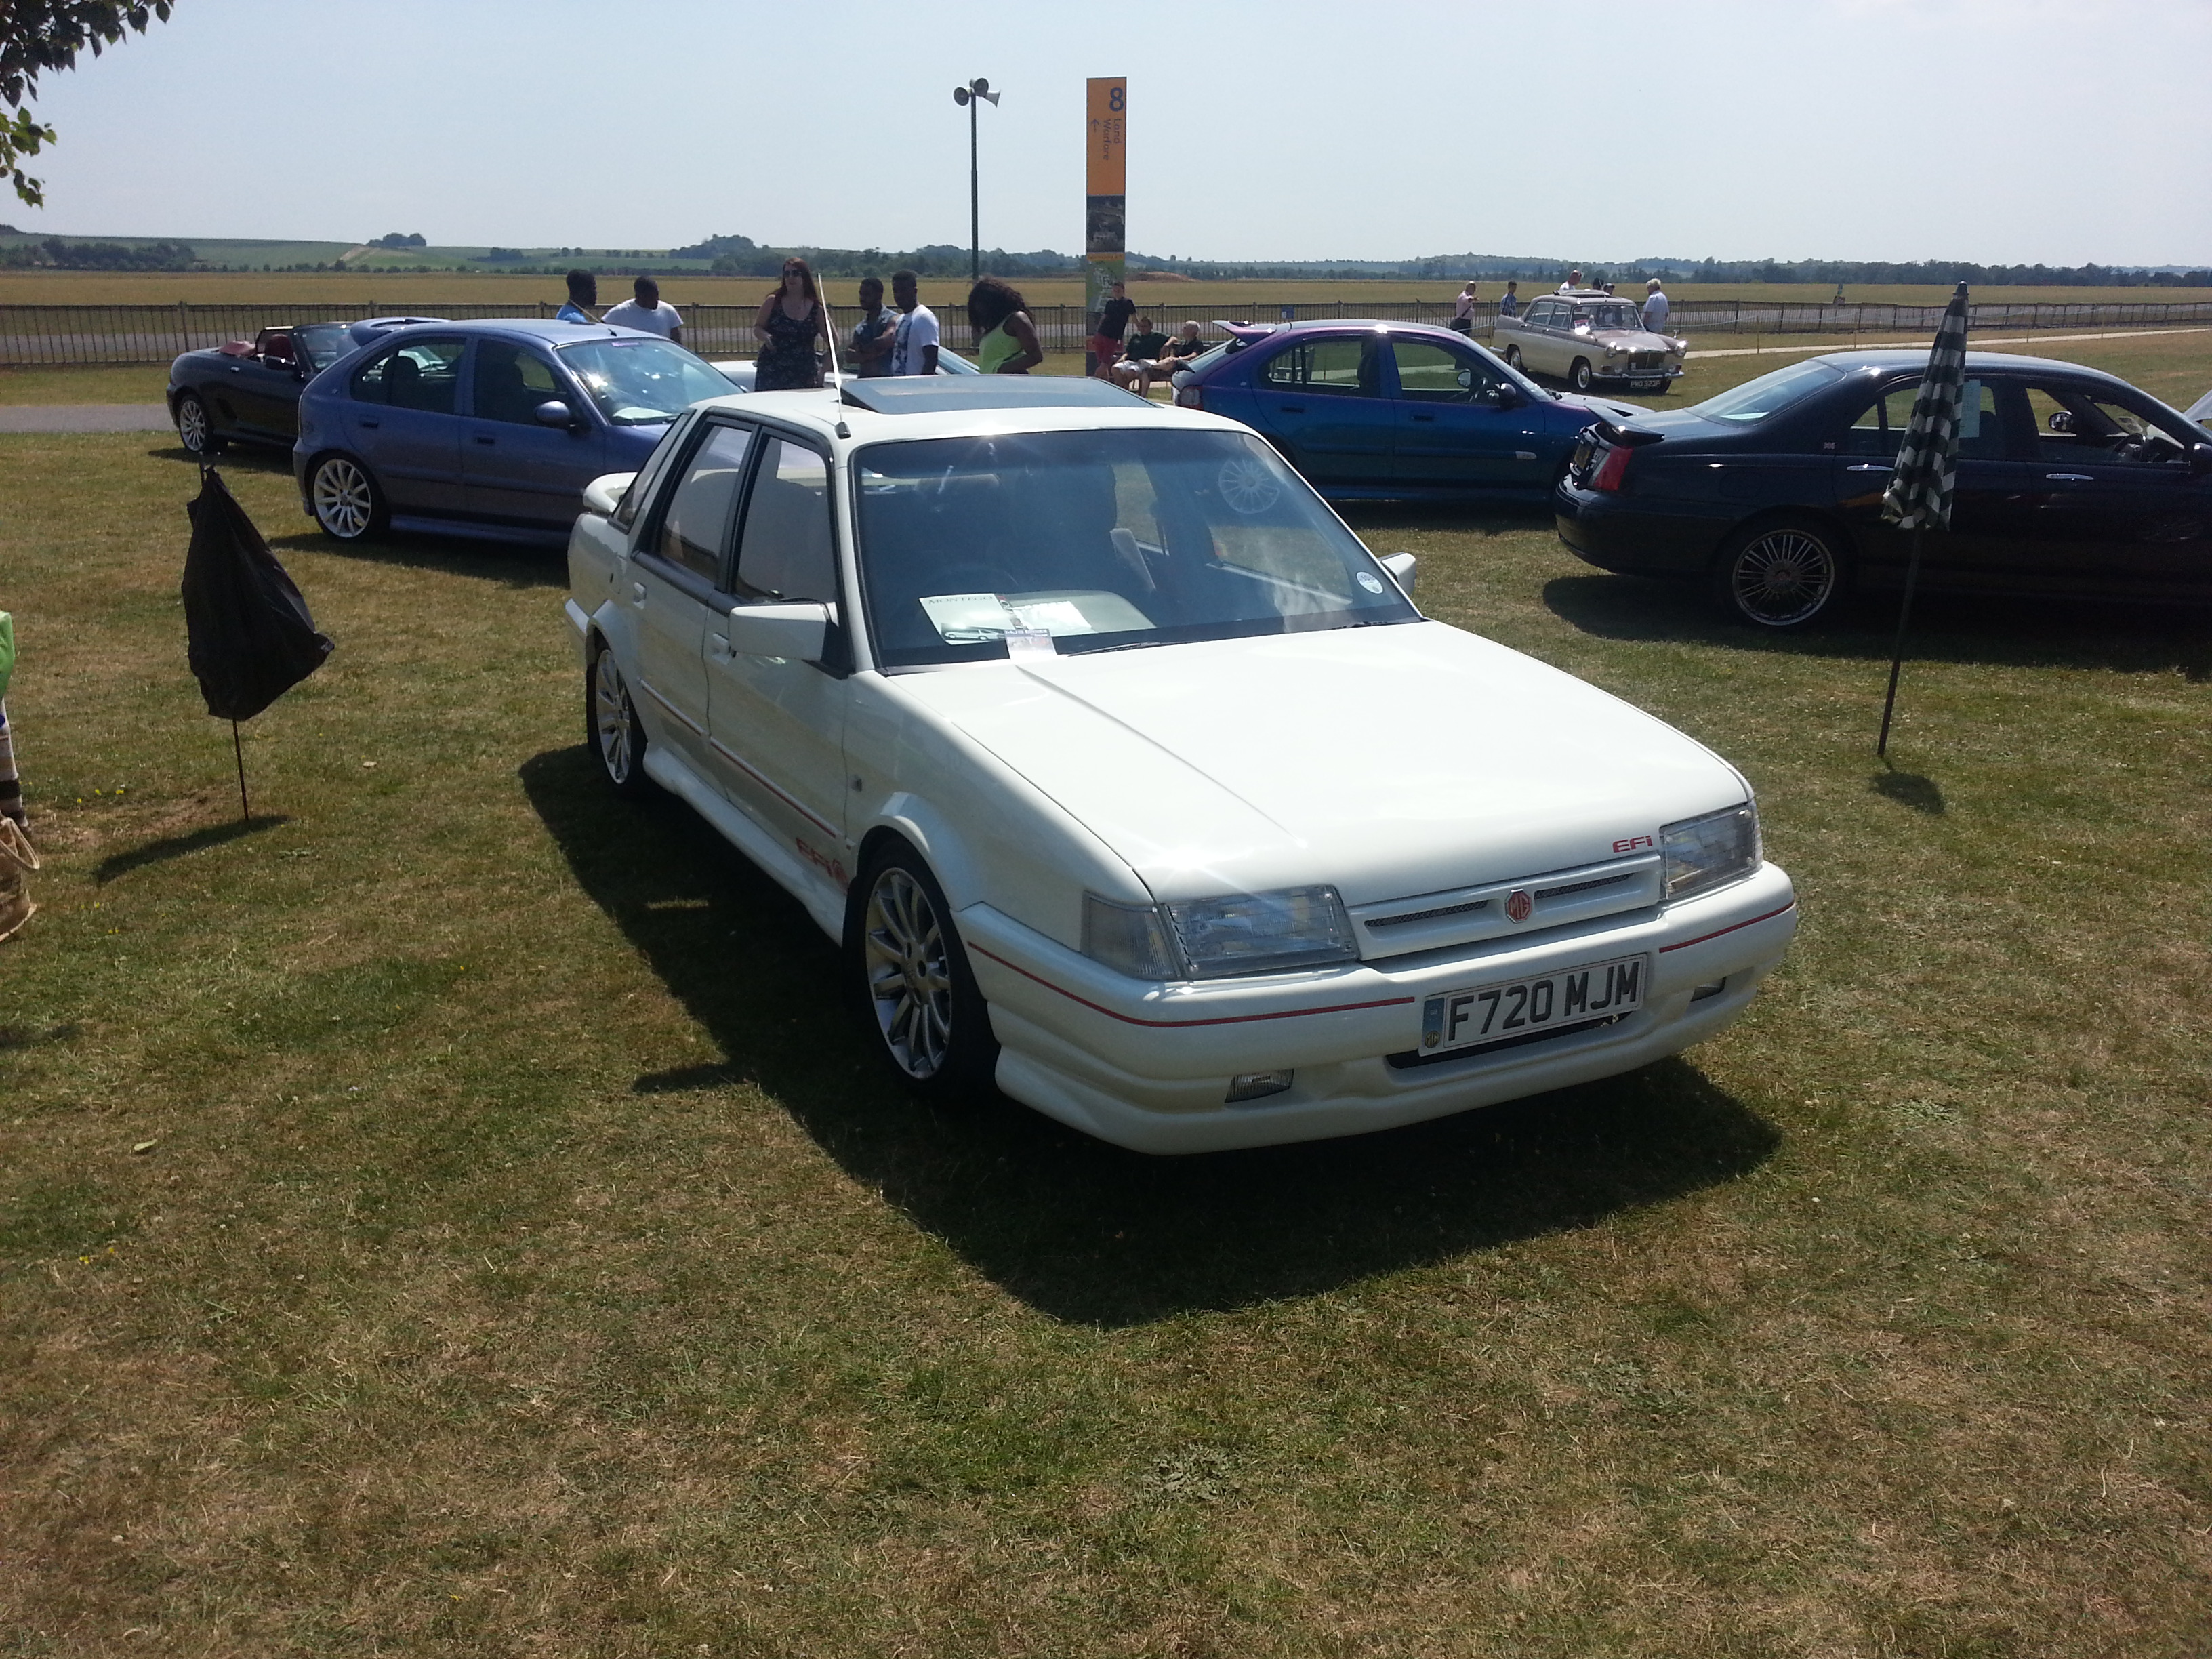 MG Montego, Car of the Show